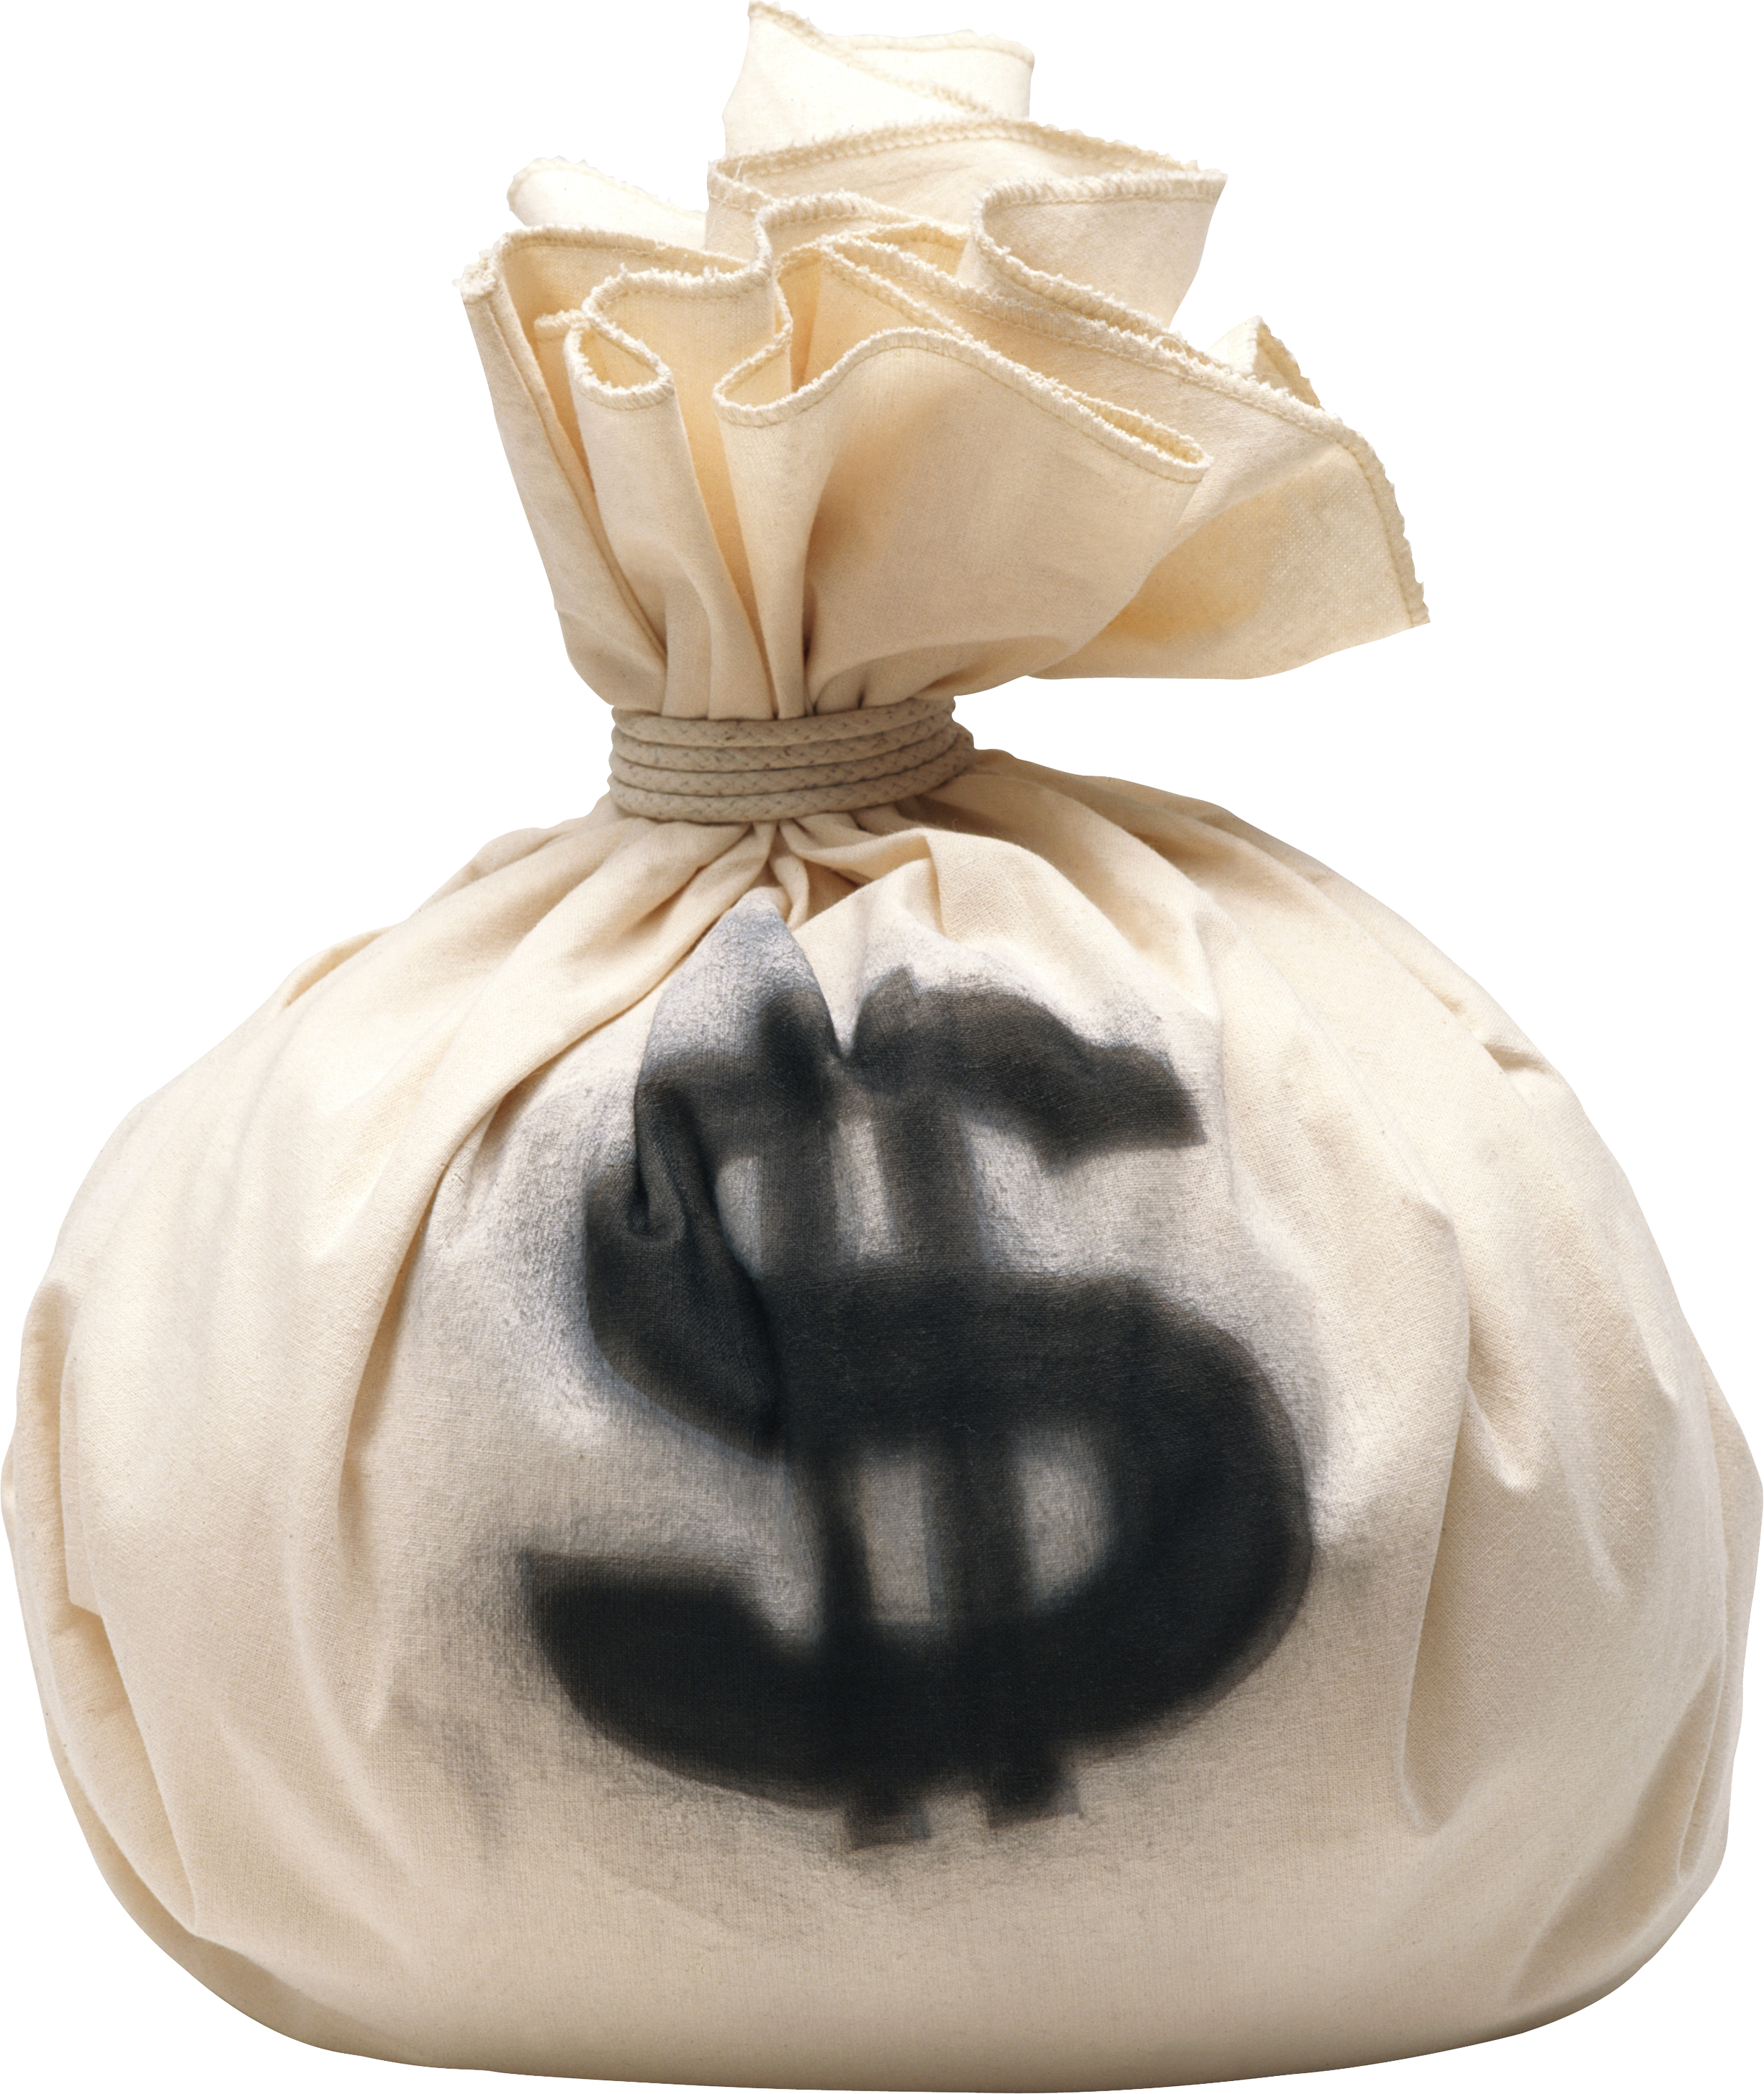 Money bags png. Image free pictures download